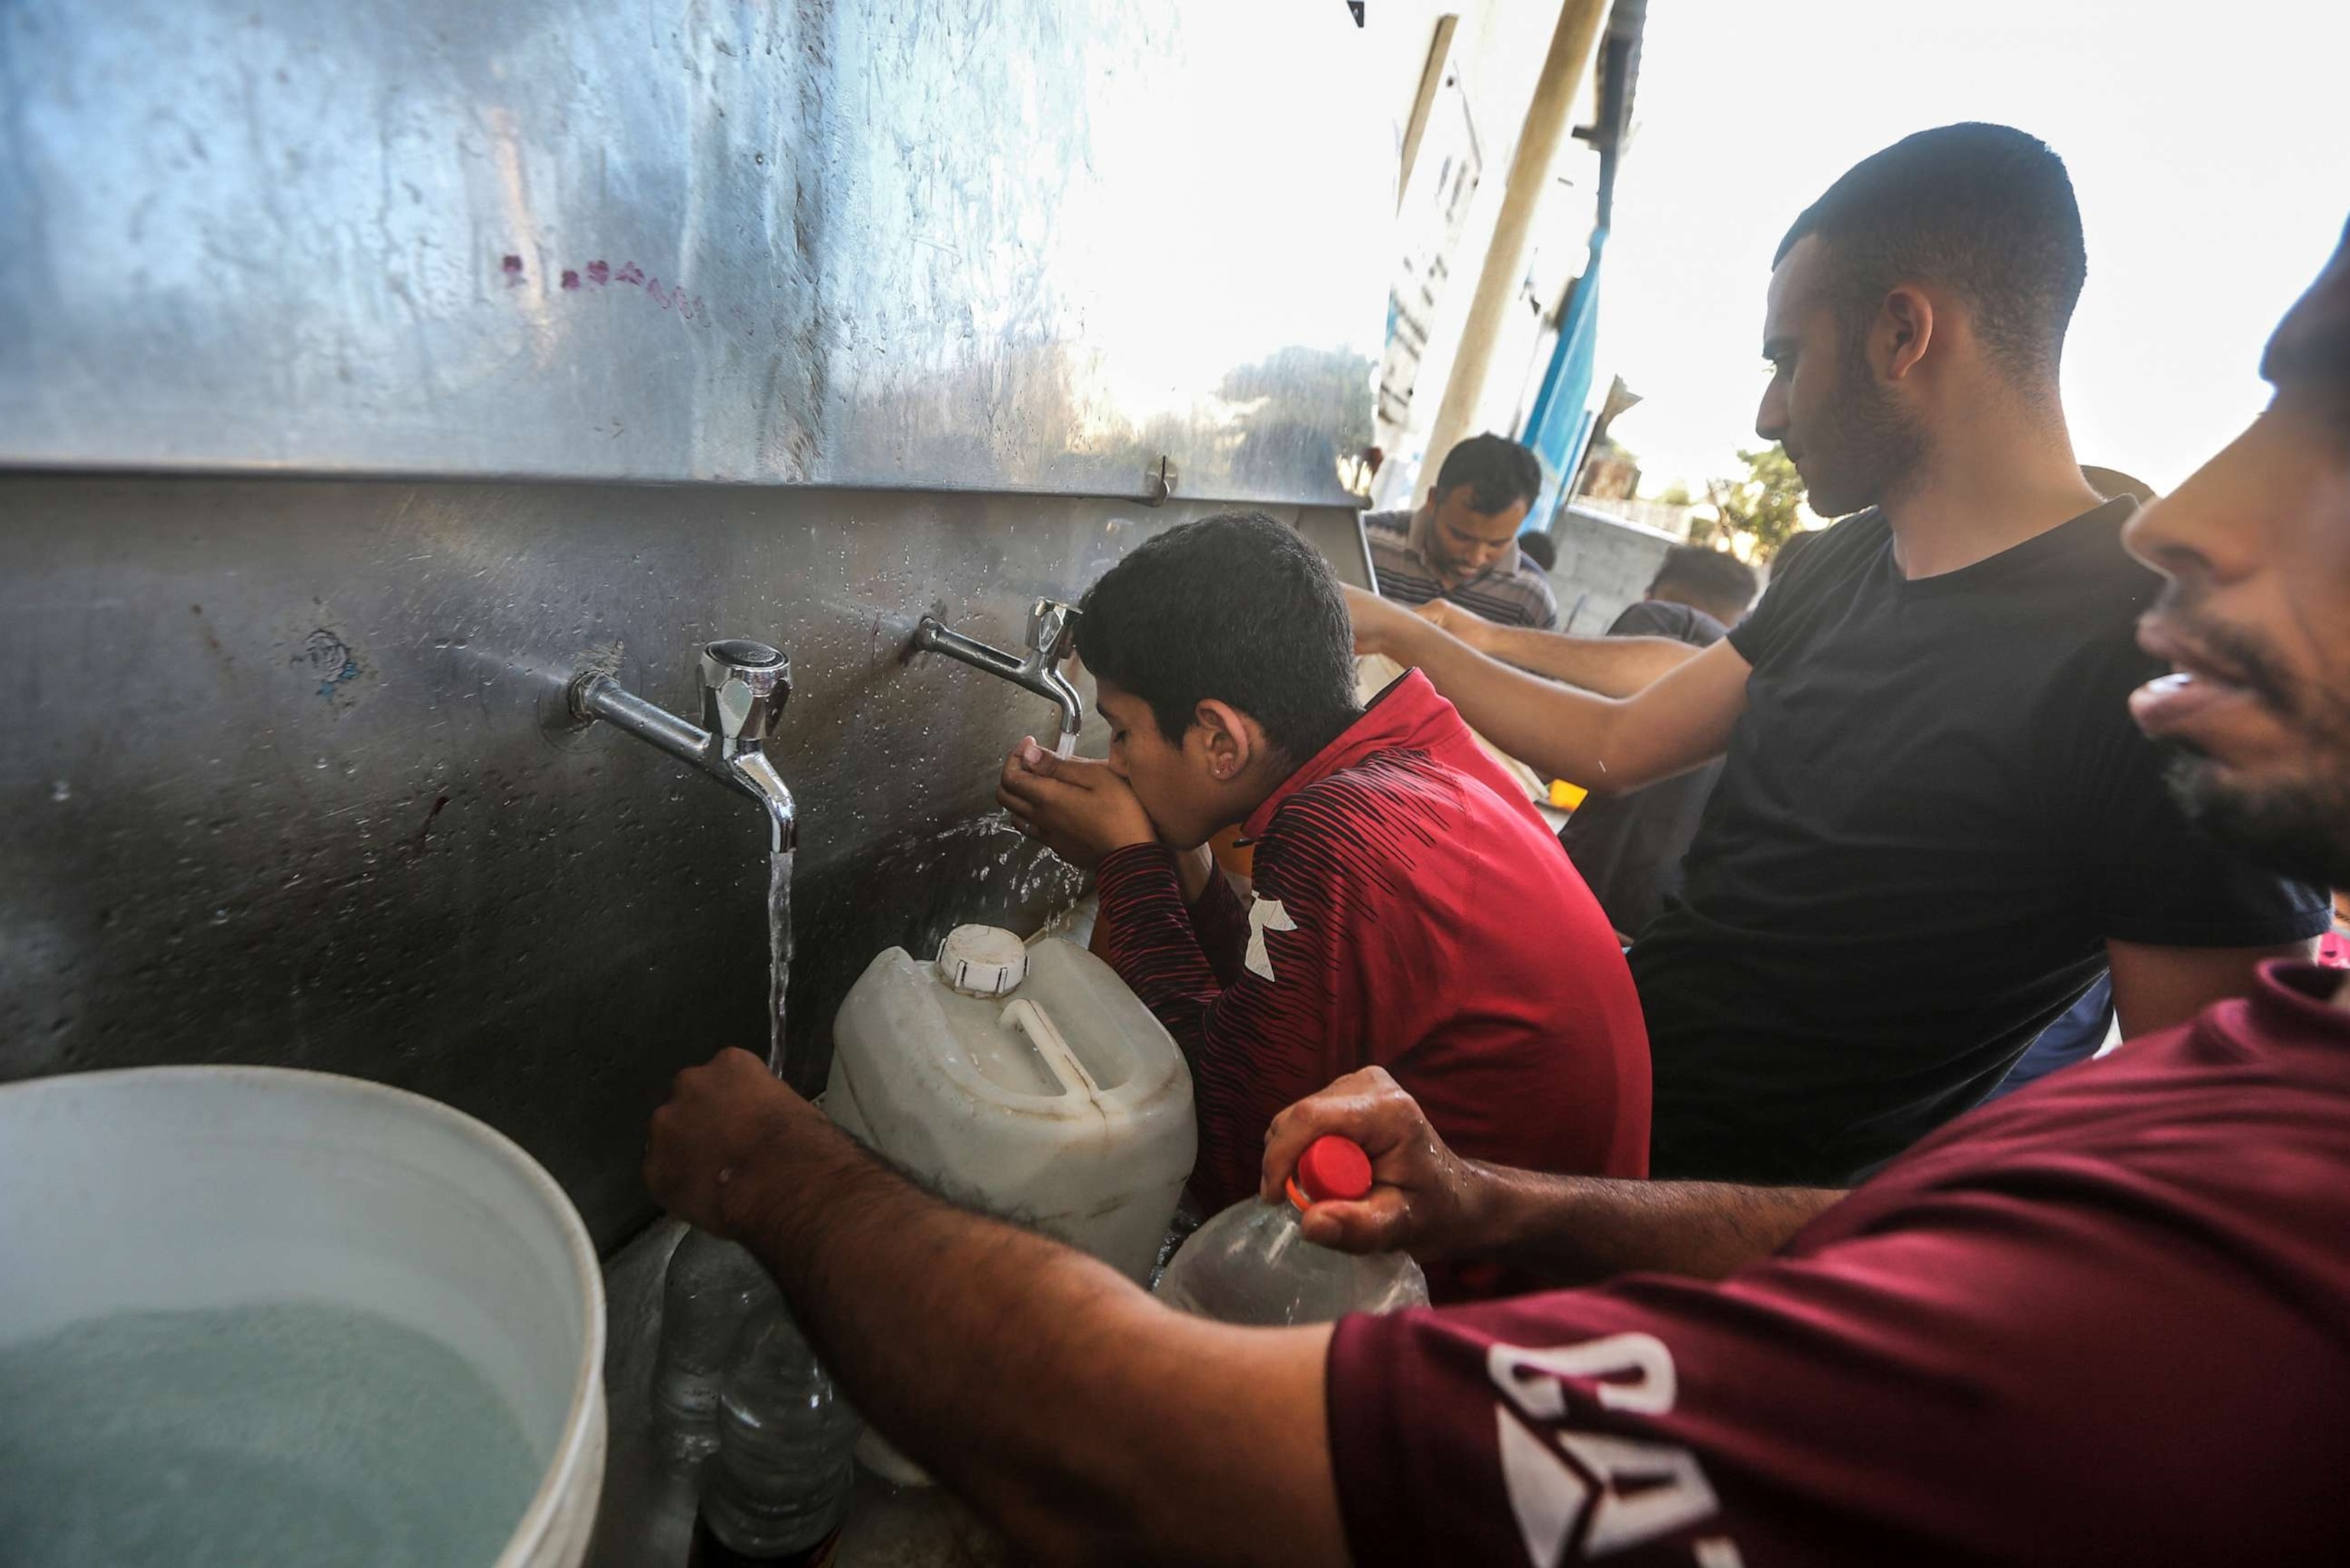 PHOTO: Palestinians fill containers with drinking water from a water distribution vehicle, amid the water crisis caused by the Israeli siege on the Gaza Strip.